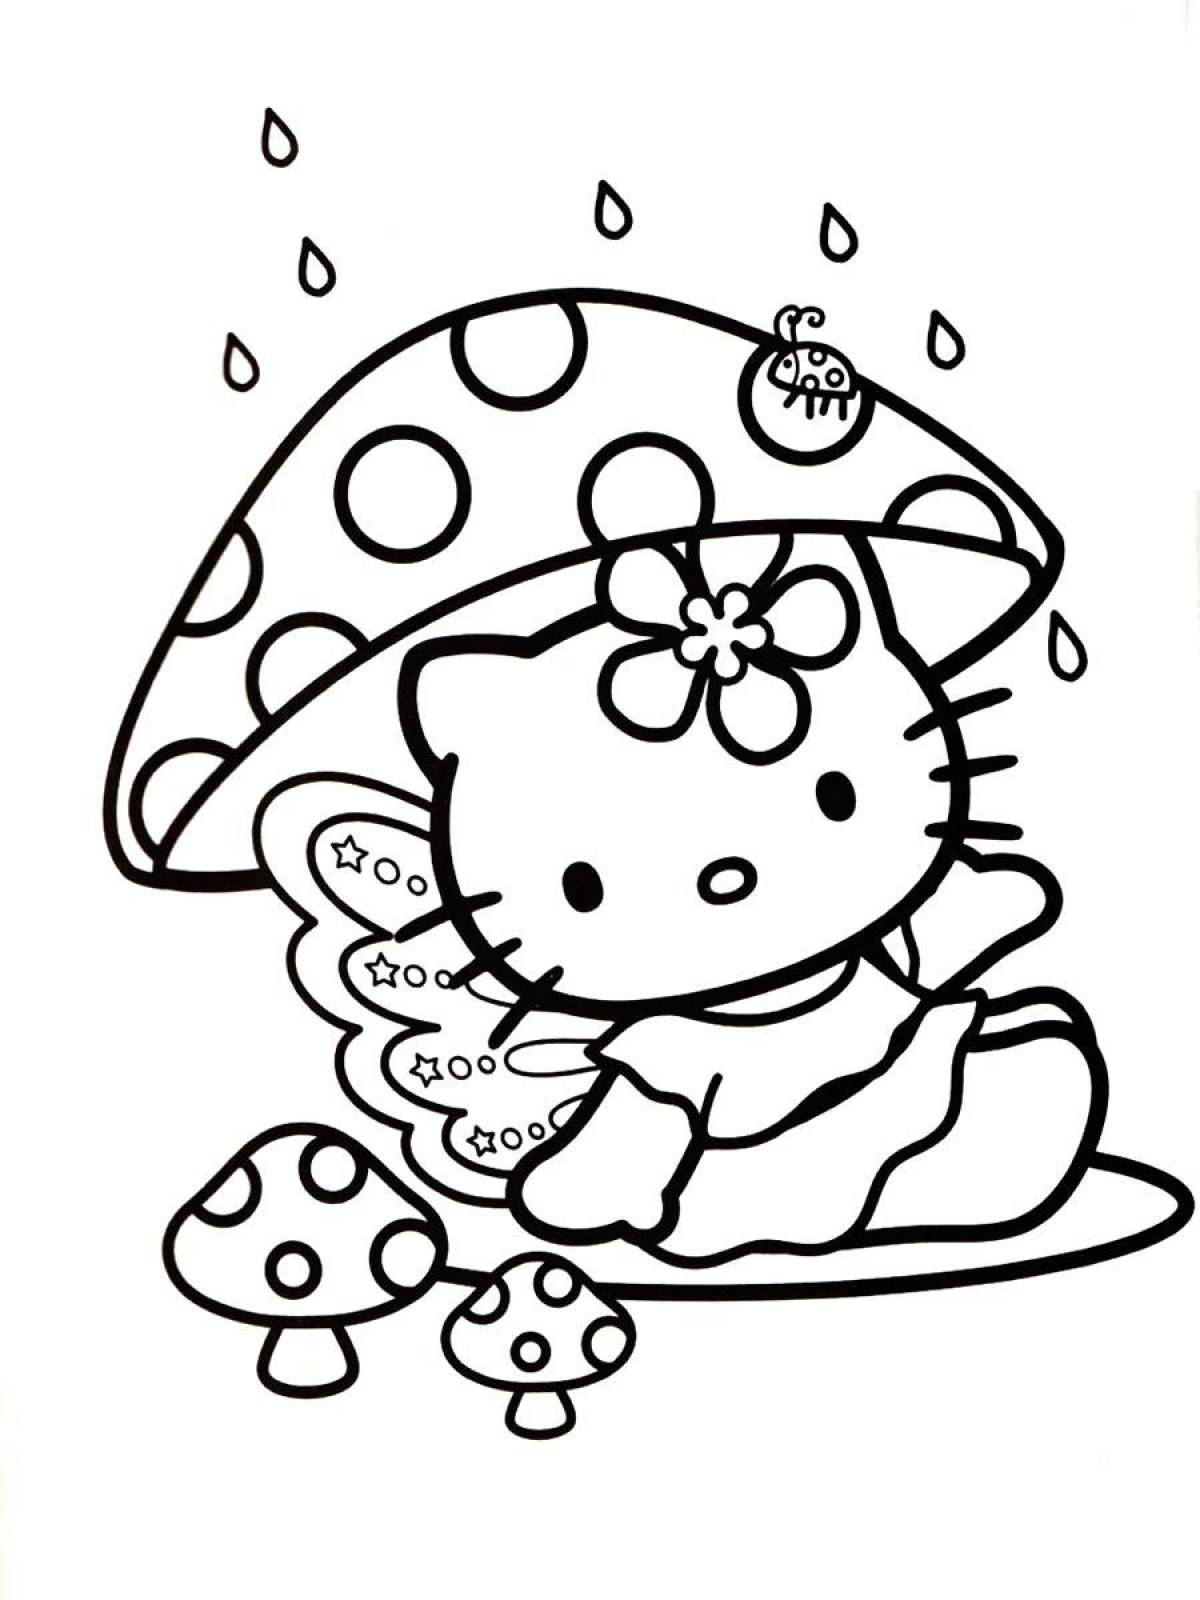 Kuromi color explosion and hello kitty coloring page